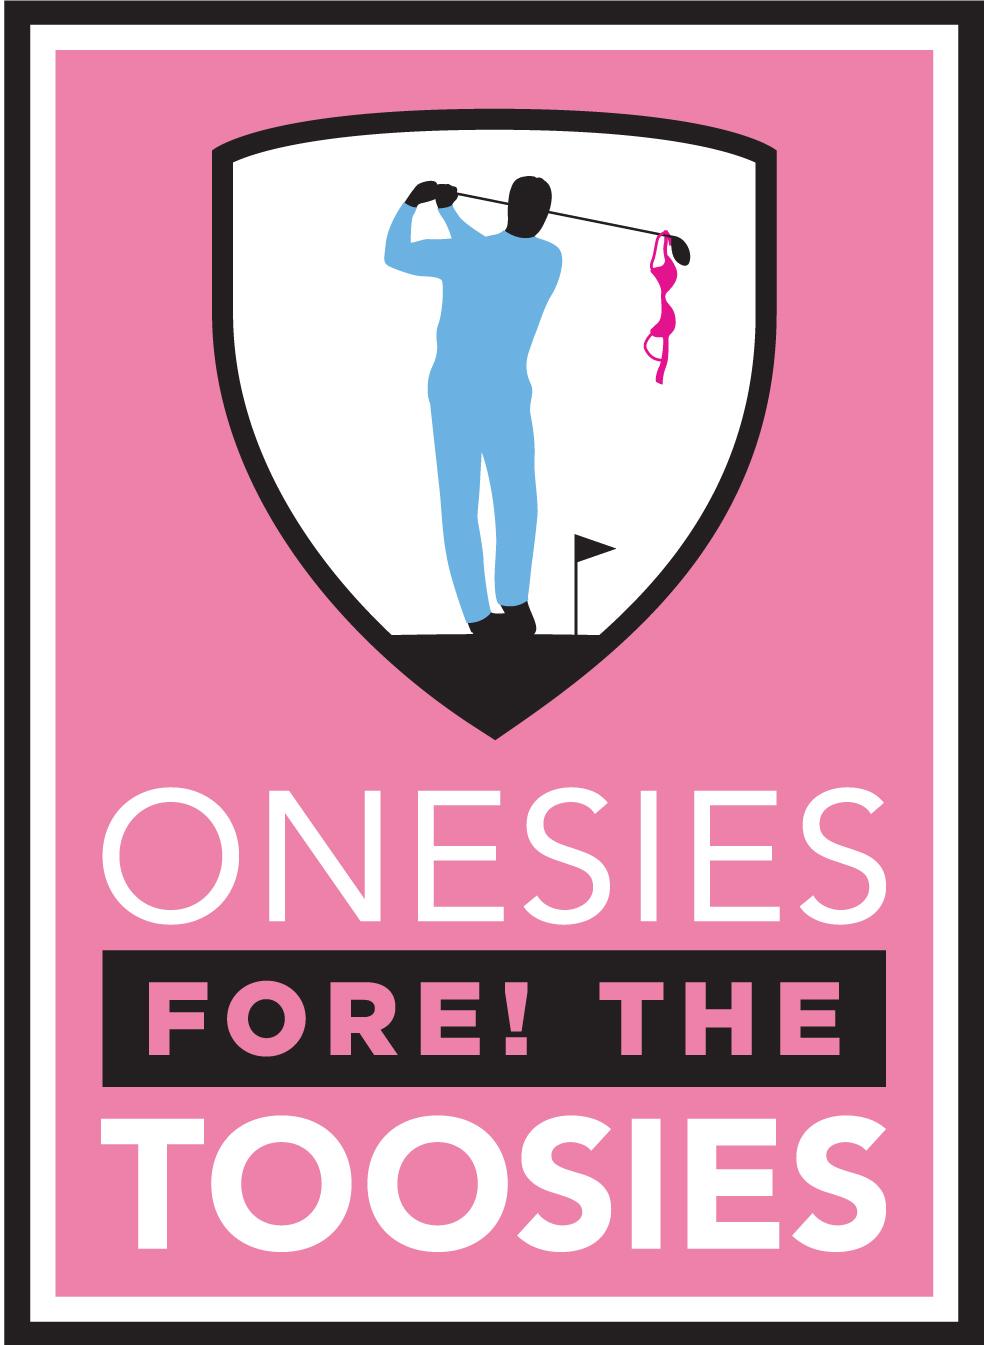 ONESIES FORE! THE TOOSIES GOLF TOURNAMENT